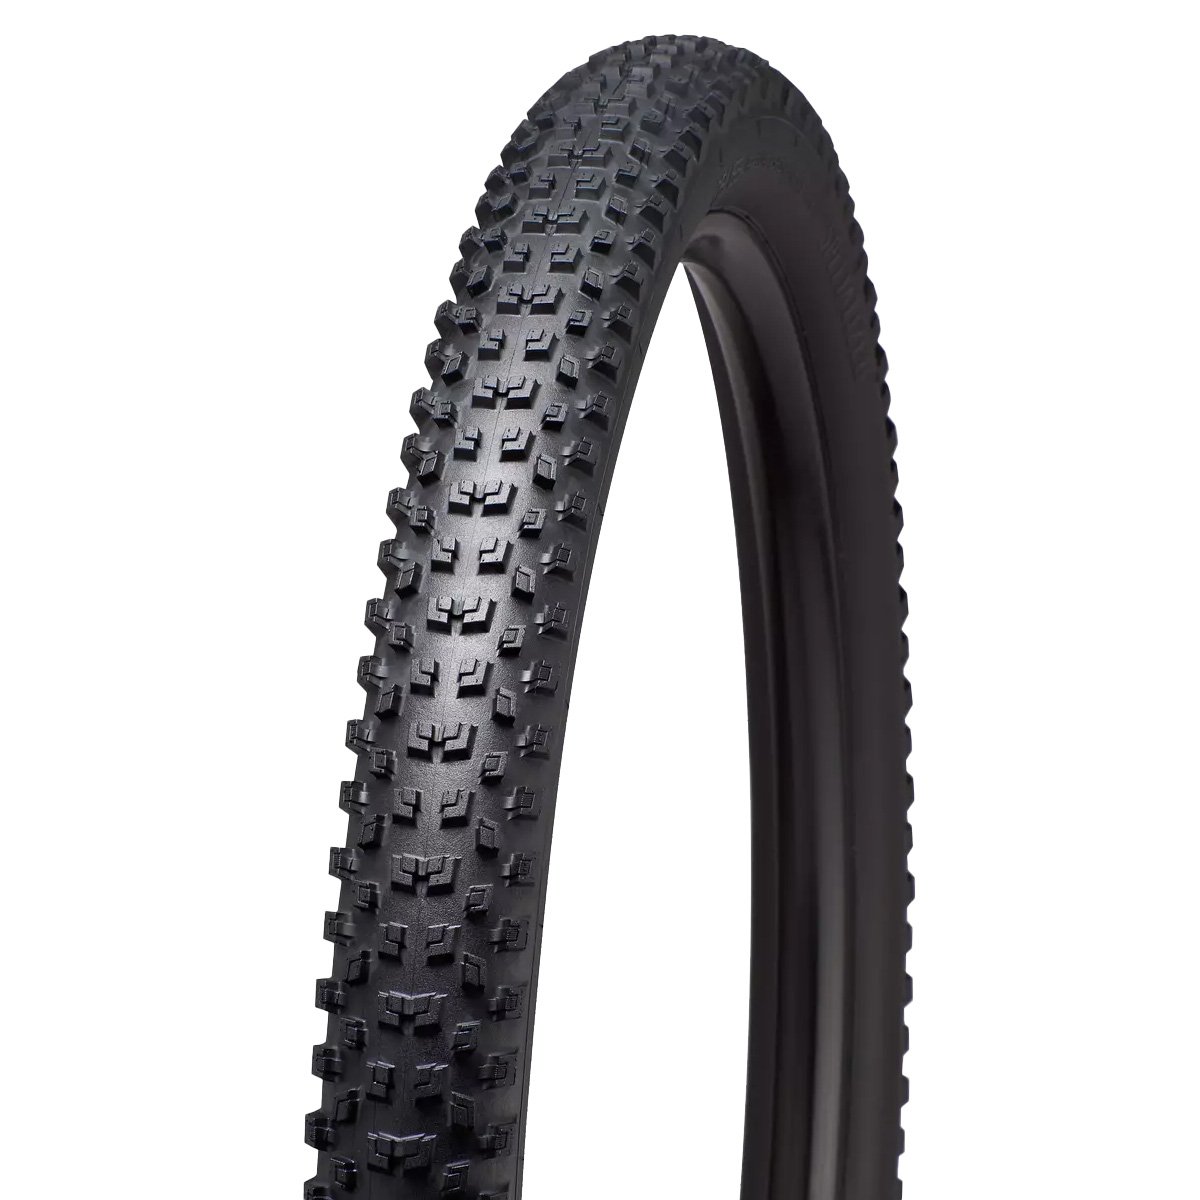 Specialized Groud Control 24 X 2.35 Tire